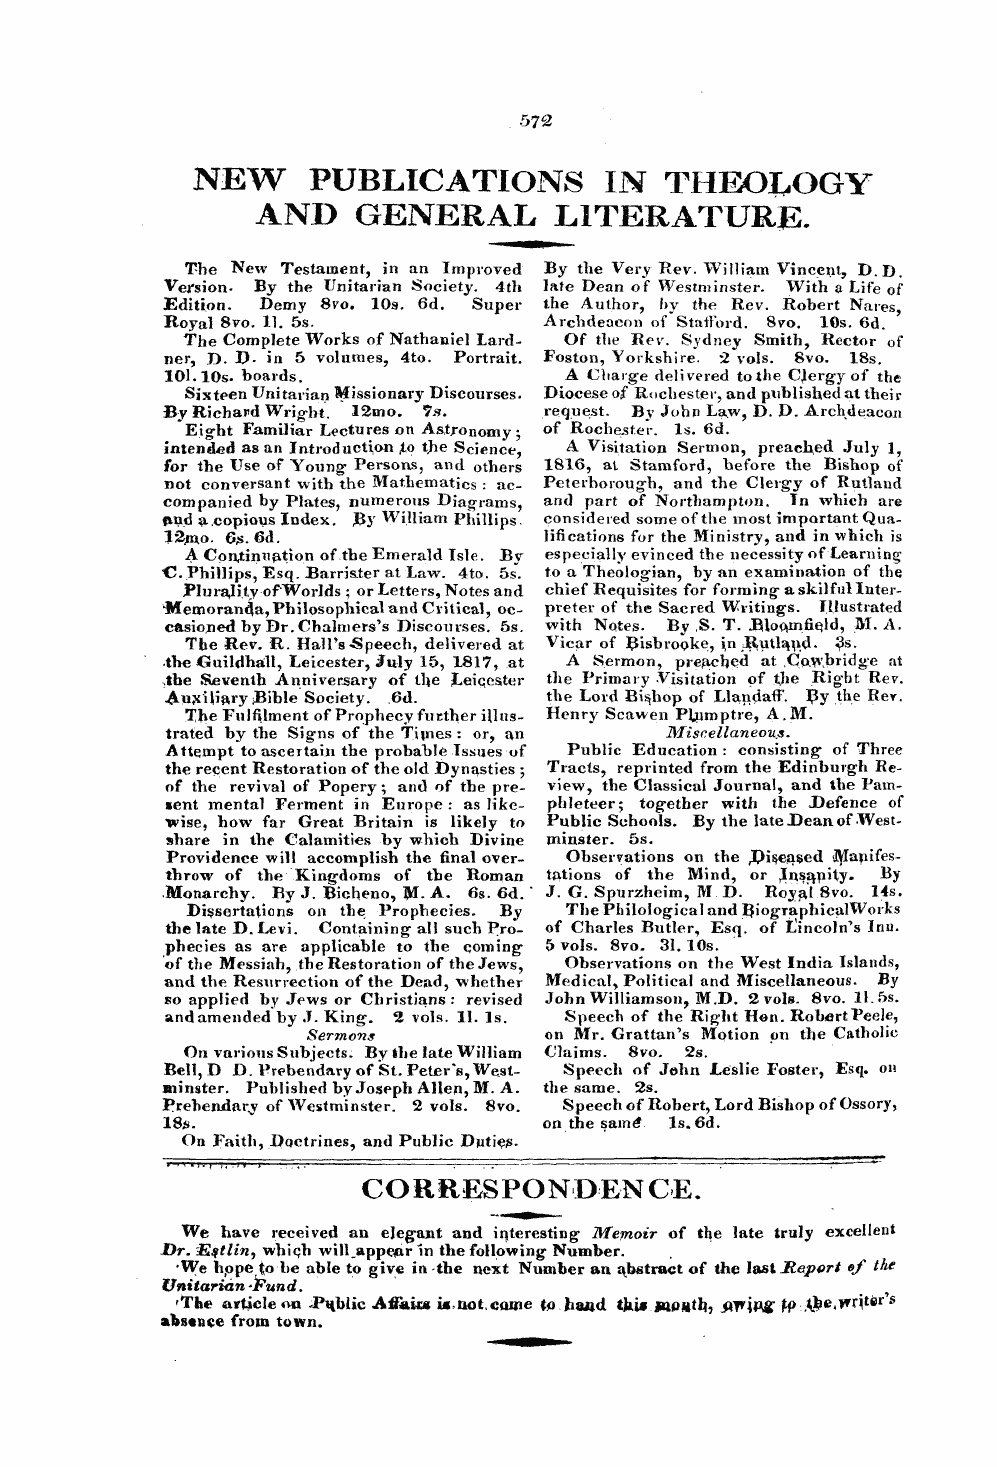 Monthly Repository (1806-1838) and Unitarian Chronicle (1832-1833): F Y, 1st edition - C O R R Es P O N D En C E.